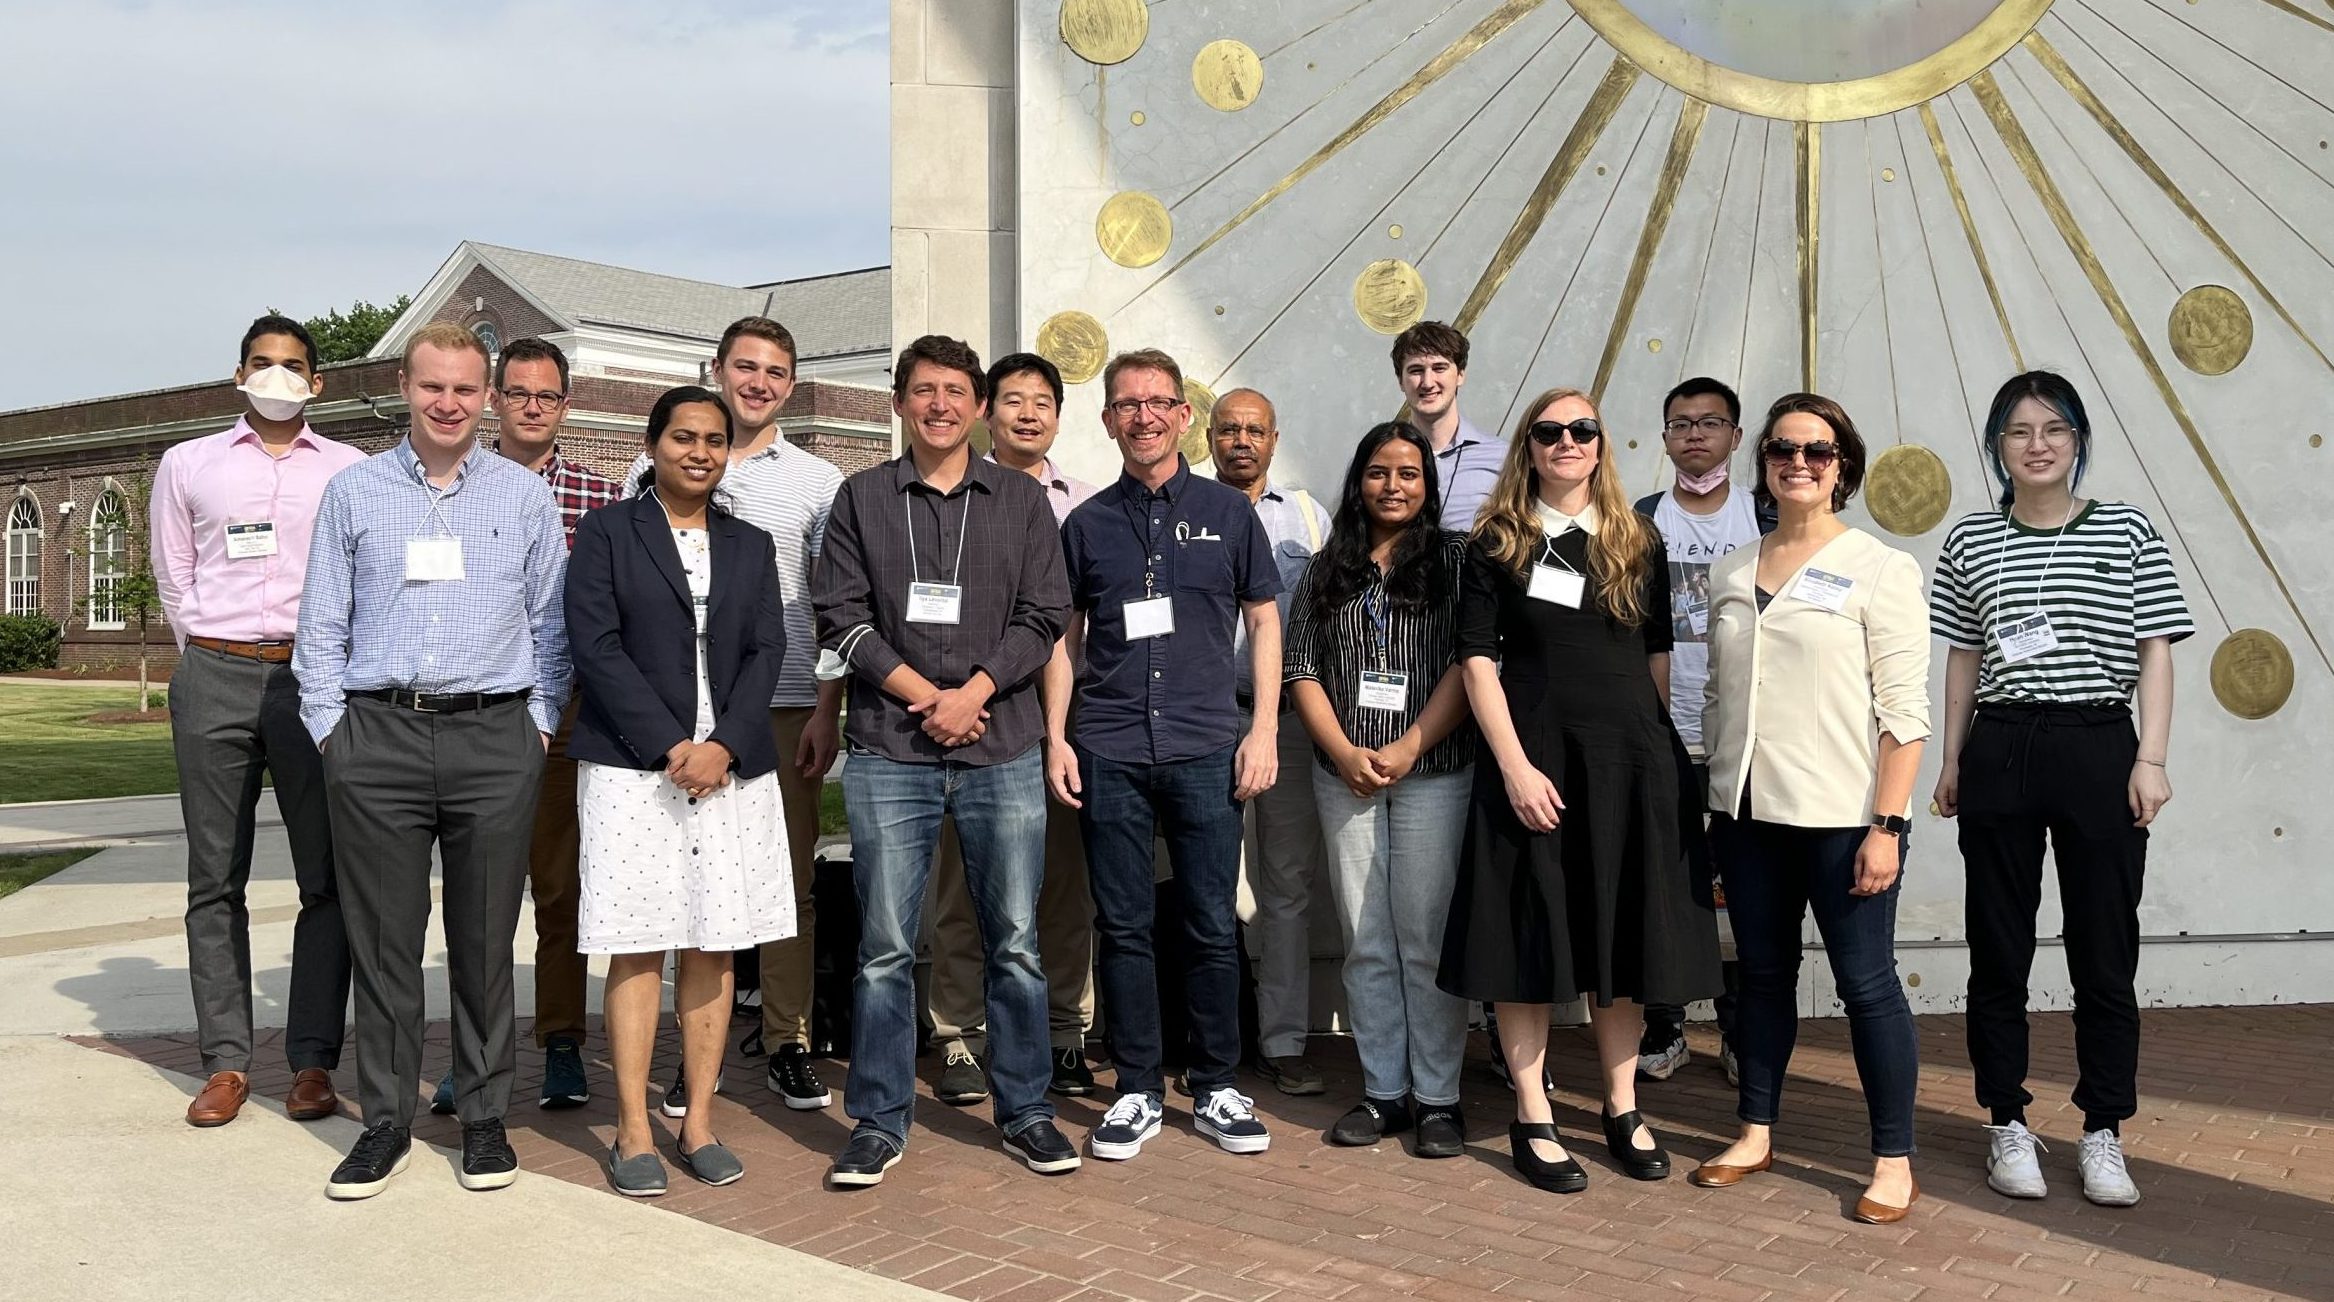 Some of the membrane biophysics attendees at MARM2022